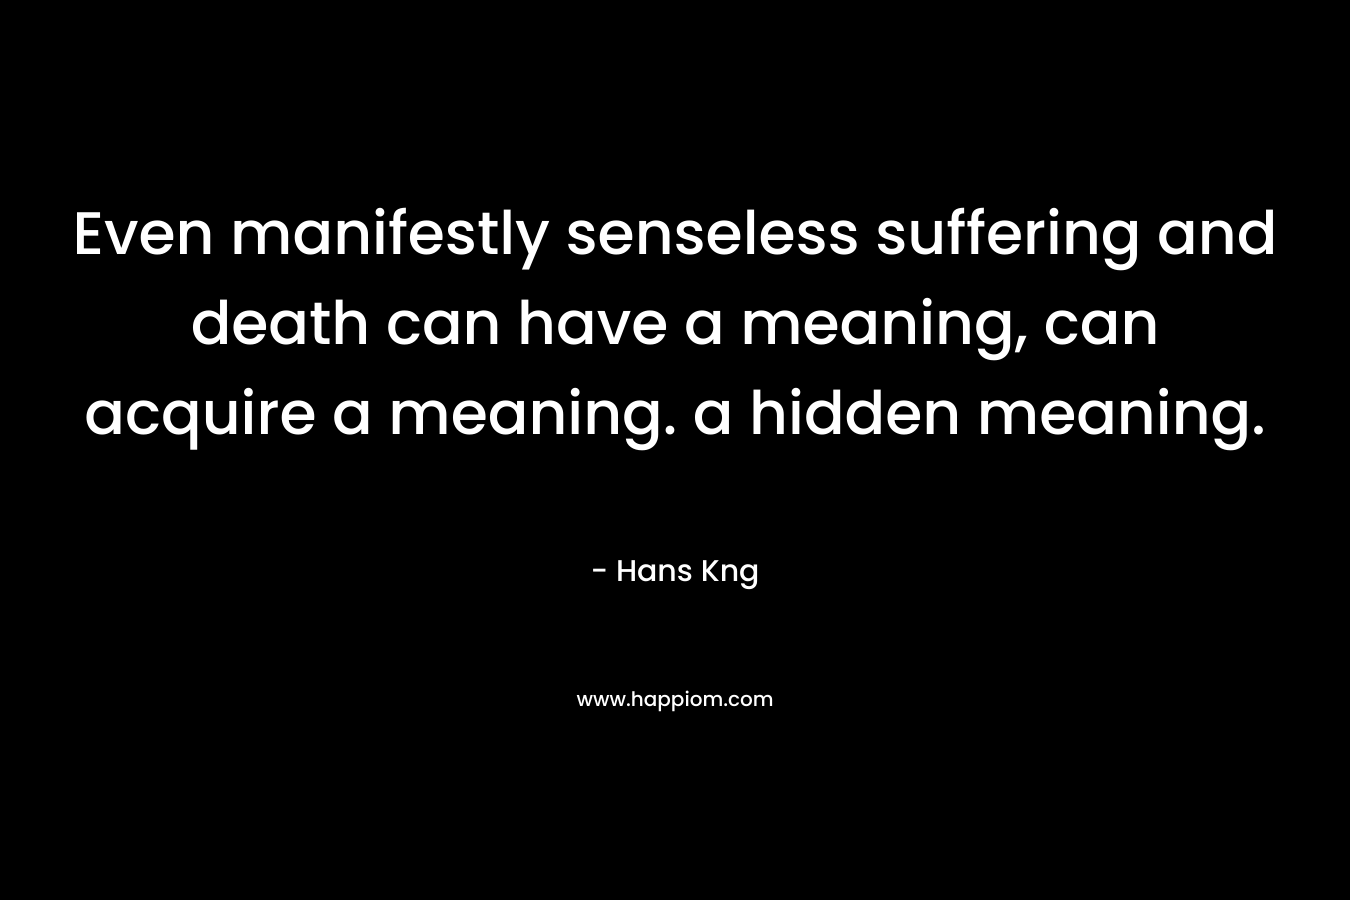 Even manifestly senseless suffering and death can have a meaning, can acquire a meaning. a hidden meaning.